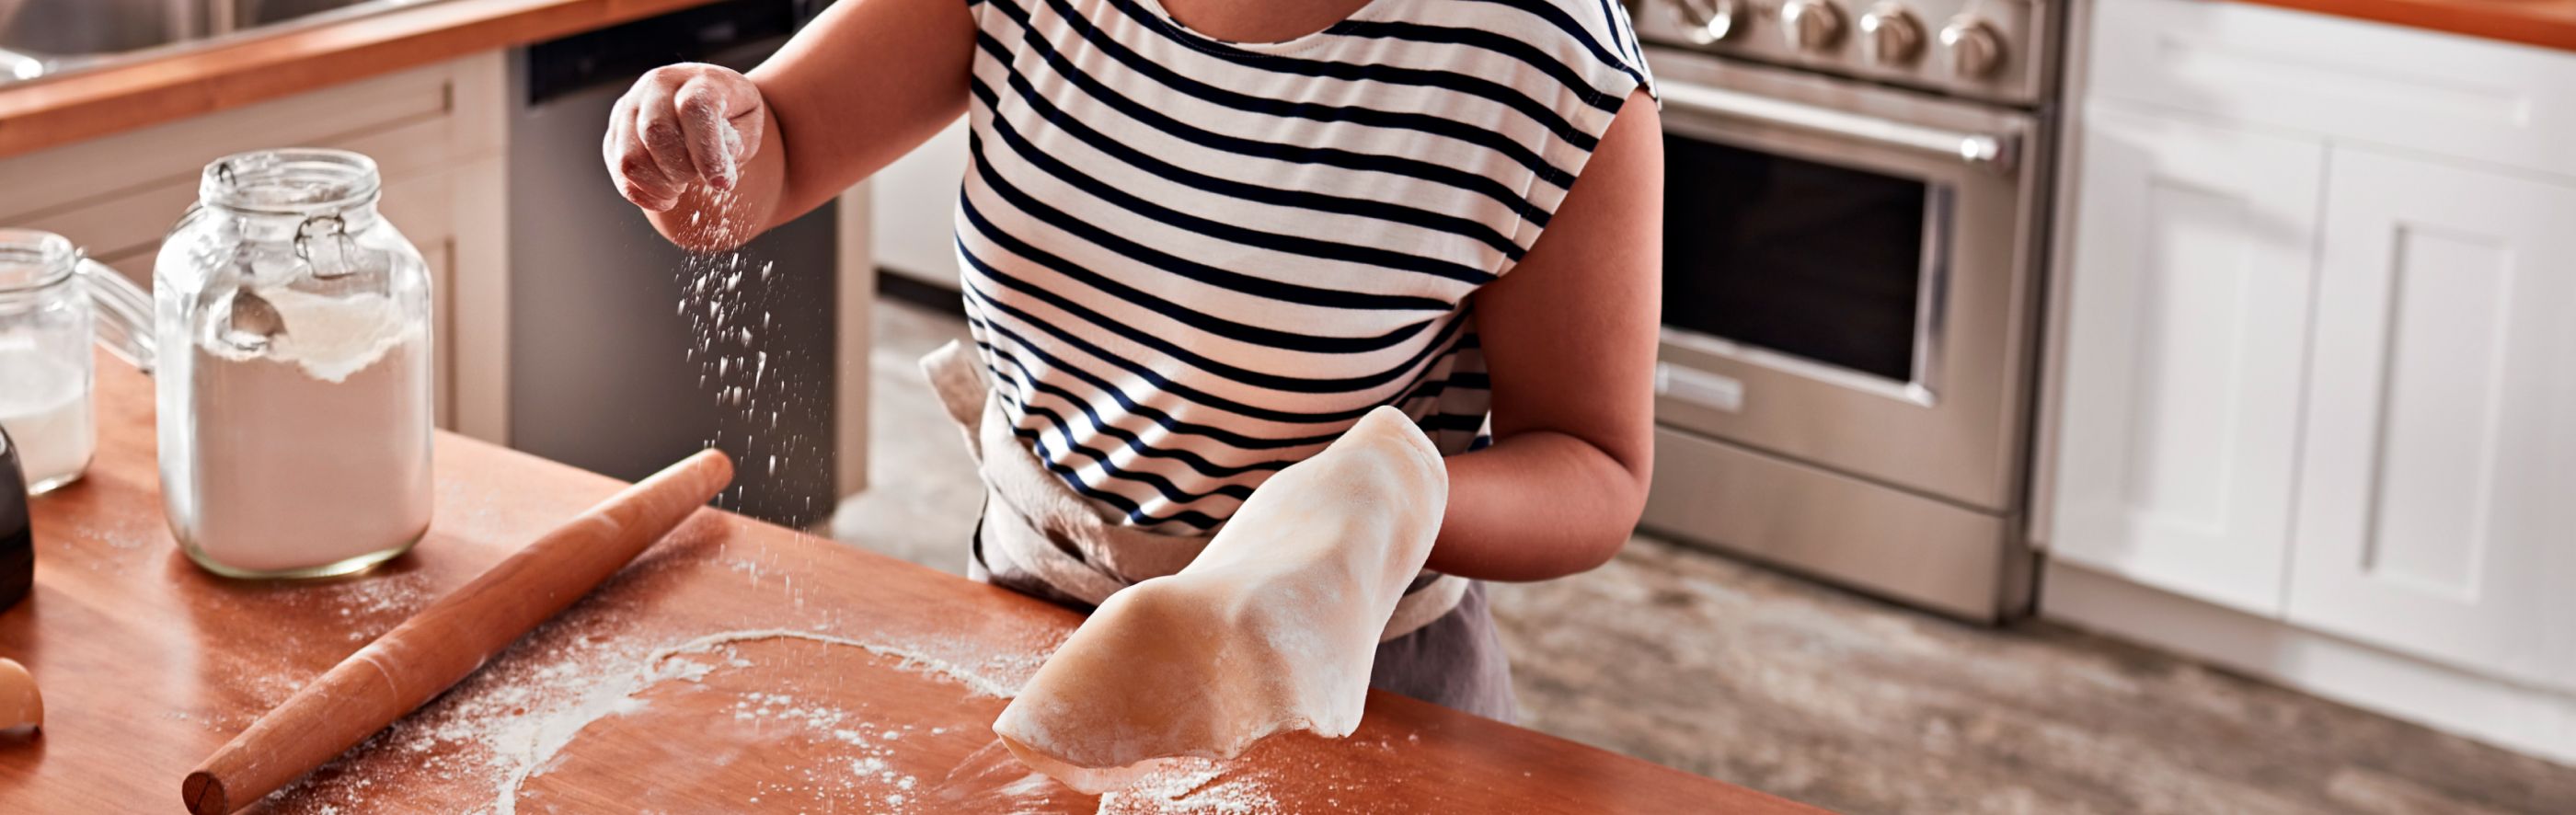 Person rolling out dough on a countertop